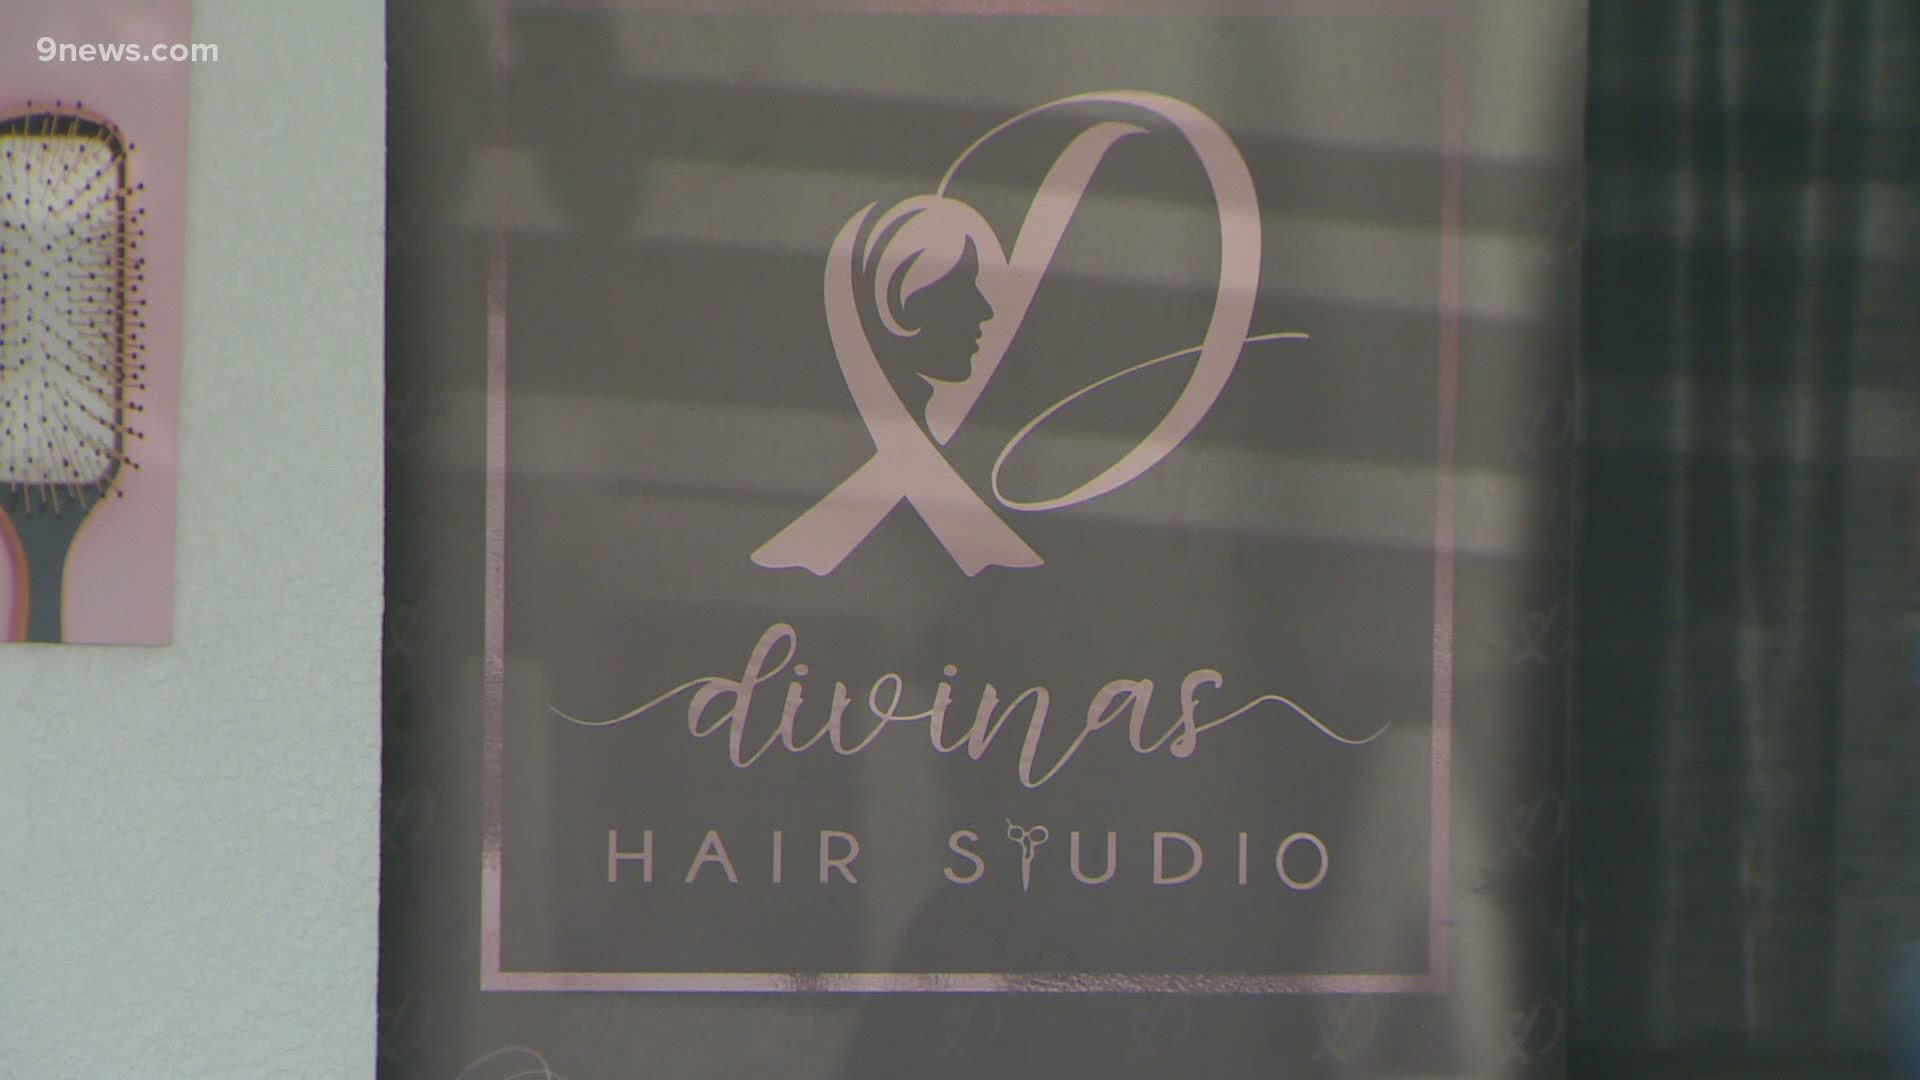 Divinas Hair Studio in Thornton prepares to reopen on May 11 but it won't be business as usual. Here's a look at some of what they're doing to keep everyone safe.